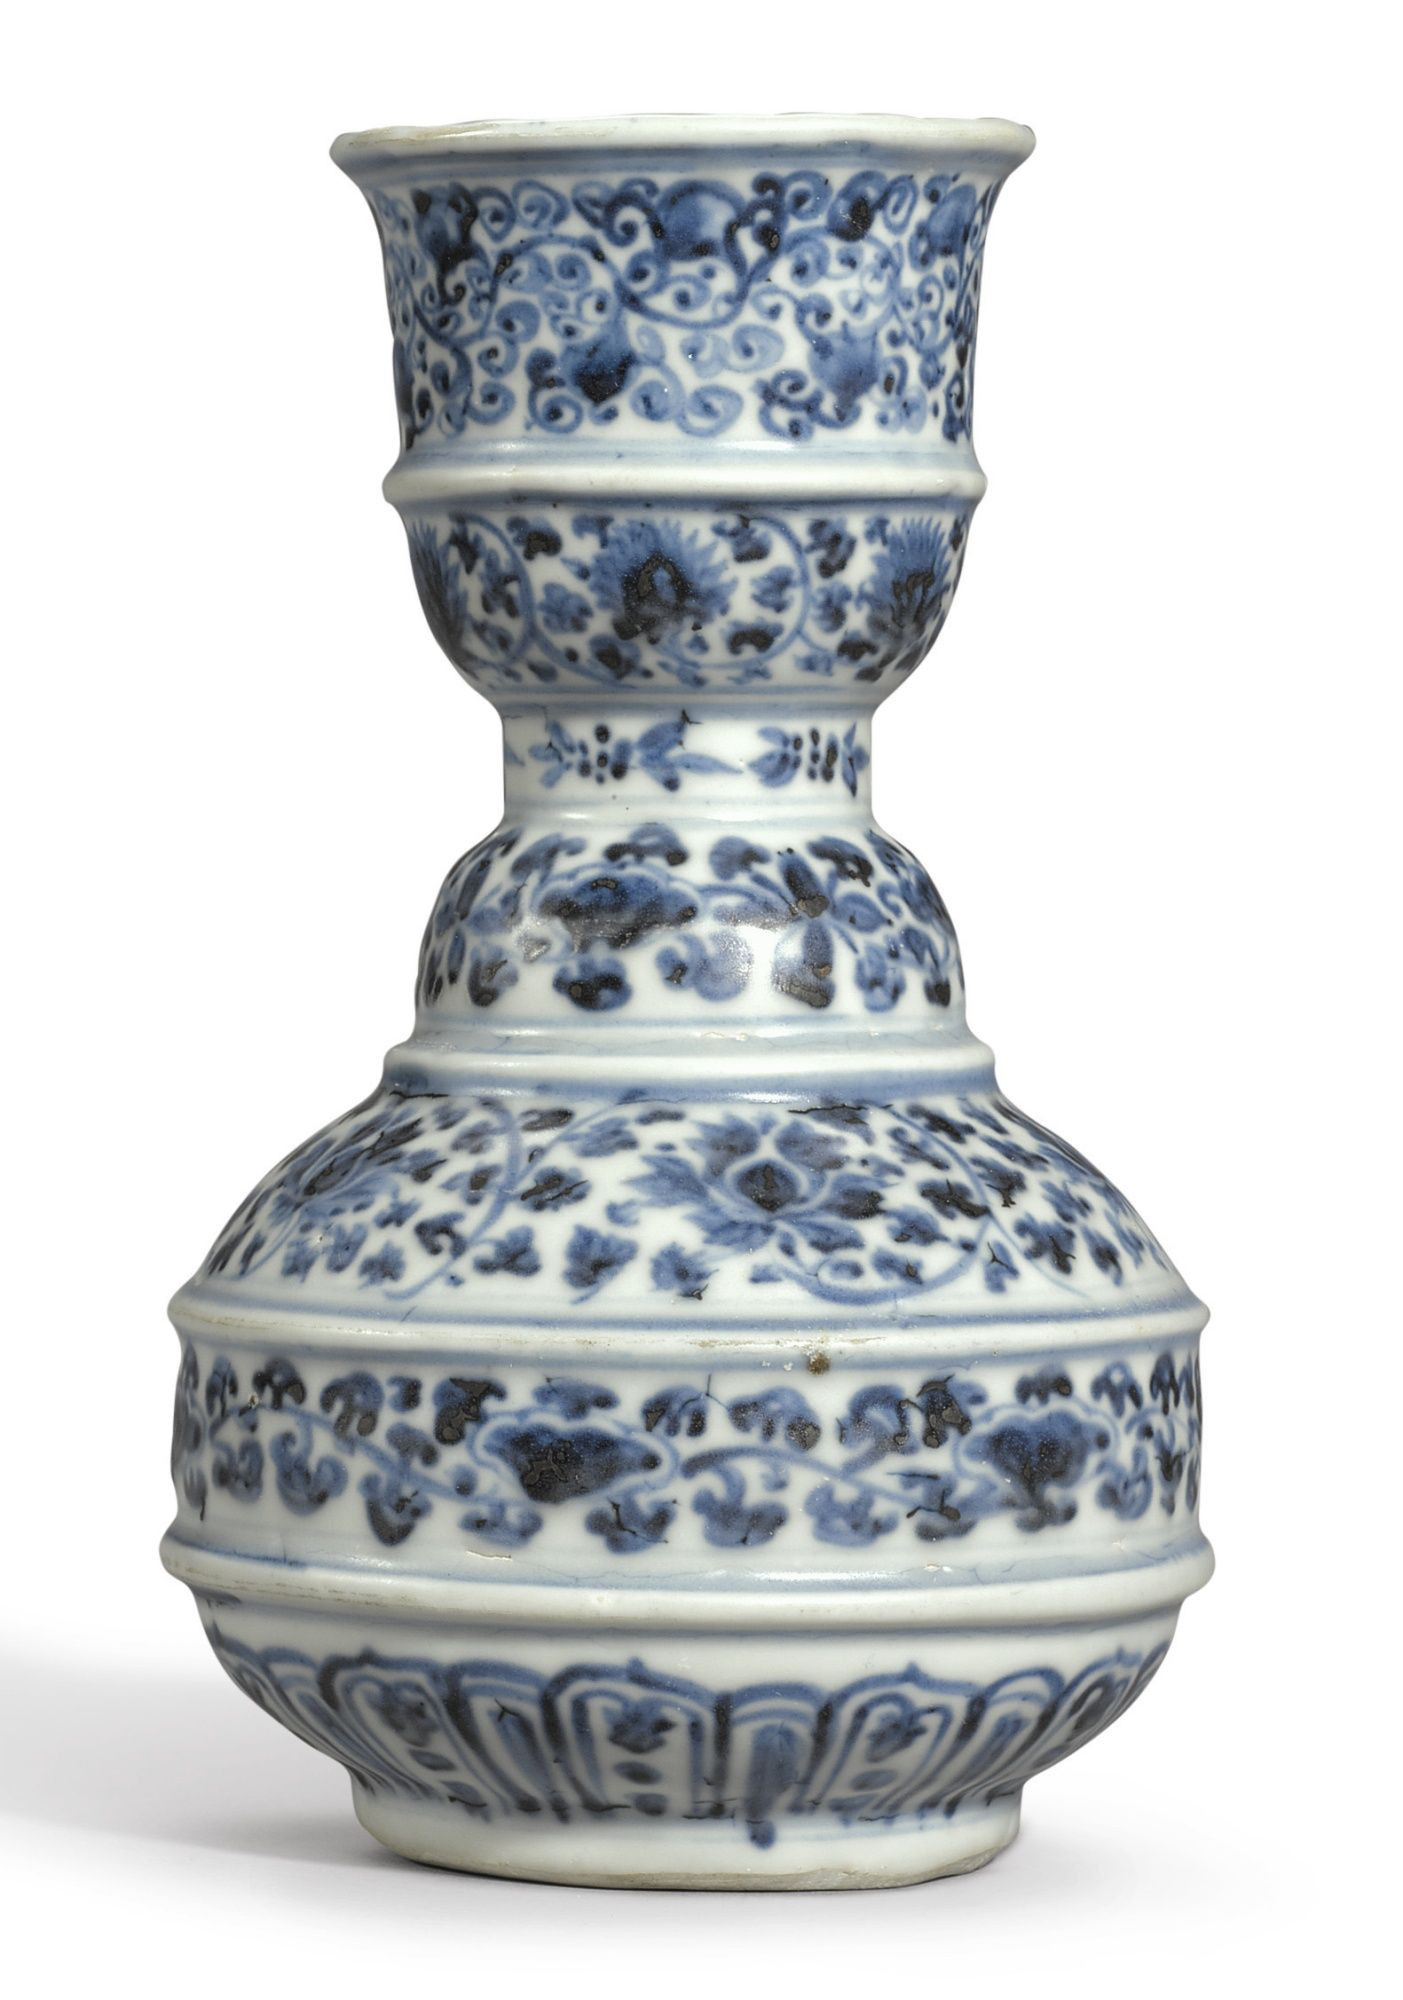 11 Fantastic Ancient Chinese Porcelain Vase 2024 free download ancient chinese porcelain vase of a rare blue and white water vessel ming dynasty late 15th early in a rare blue and white water vessel ming dynasty late 15th early 16th century